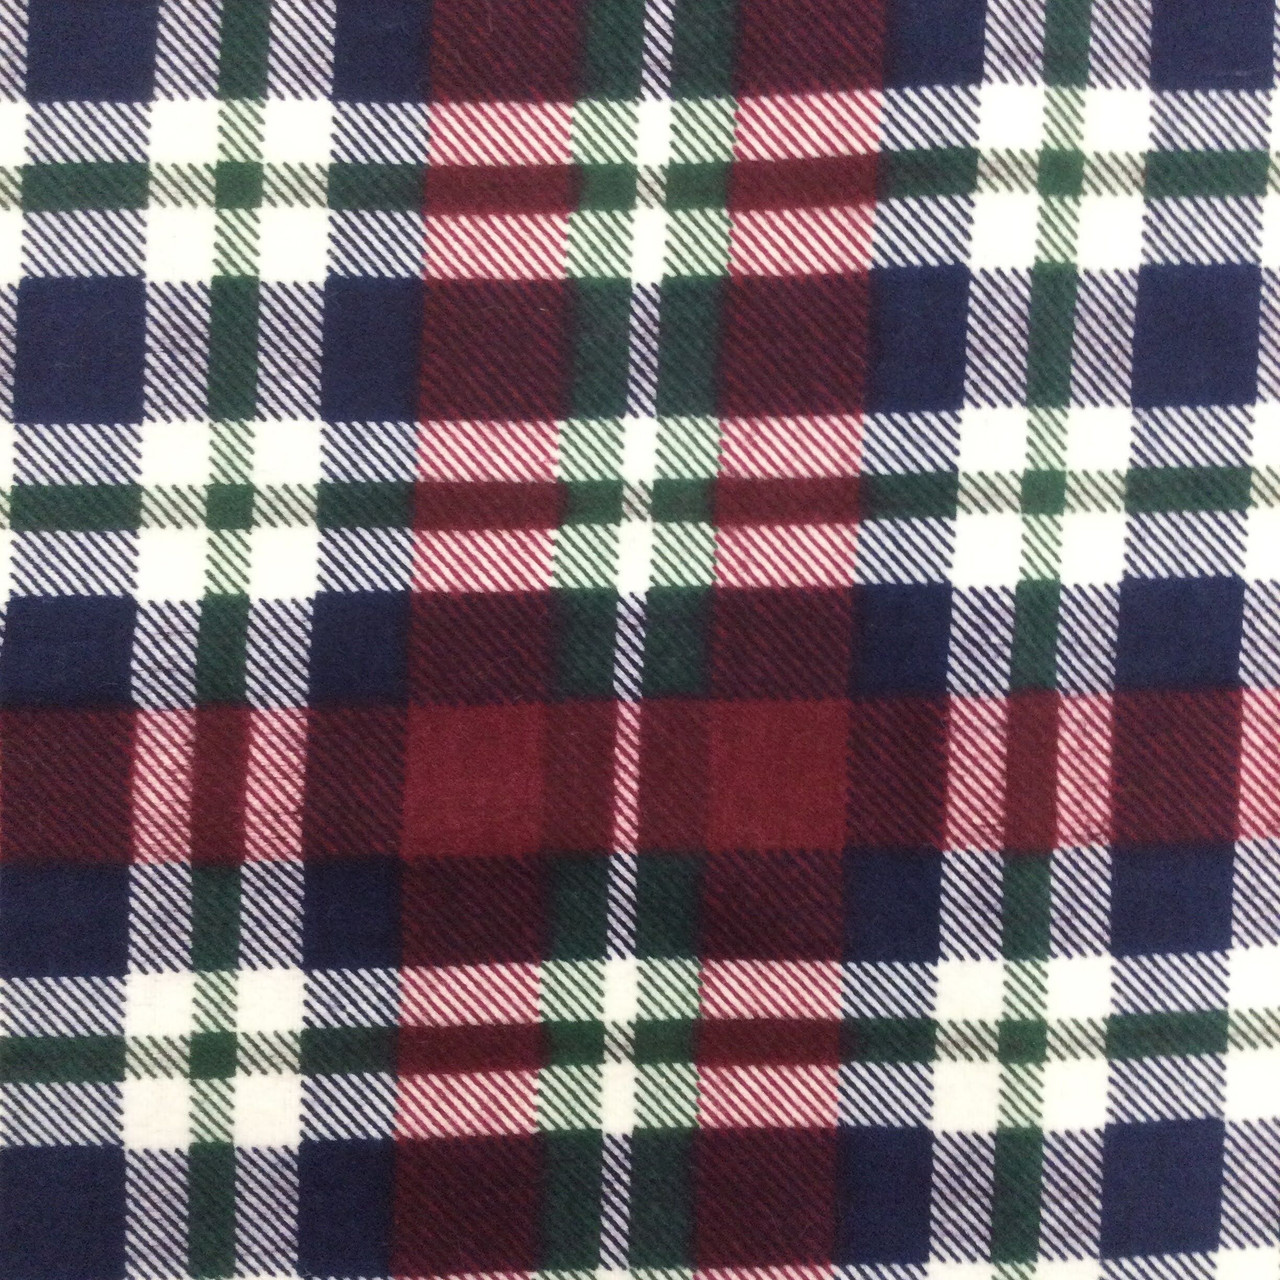 Plaid in Red / Blue / Green / White | Flannel Fabric | 44 Wide | 100%  Cotton | By The Yard 188